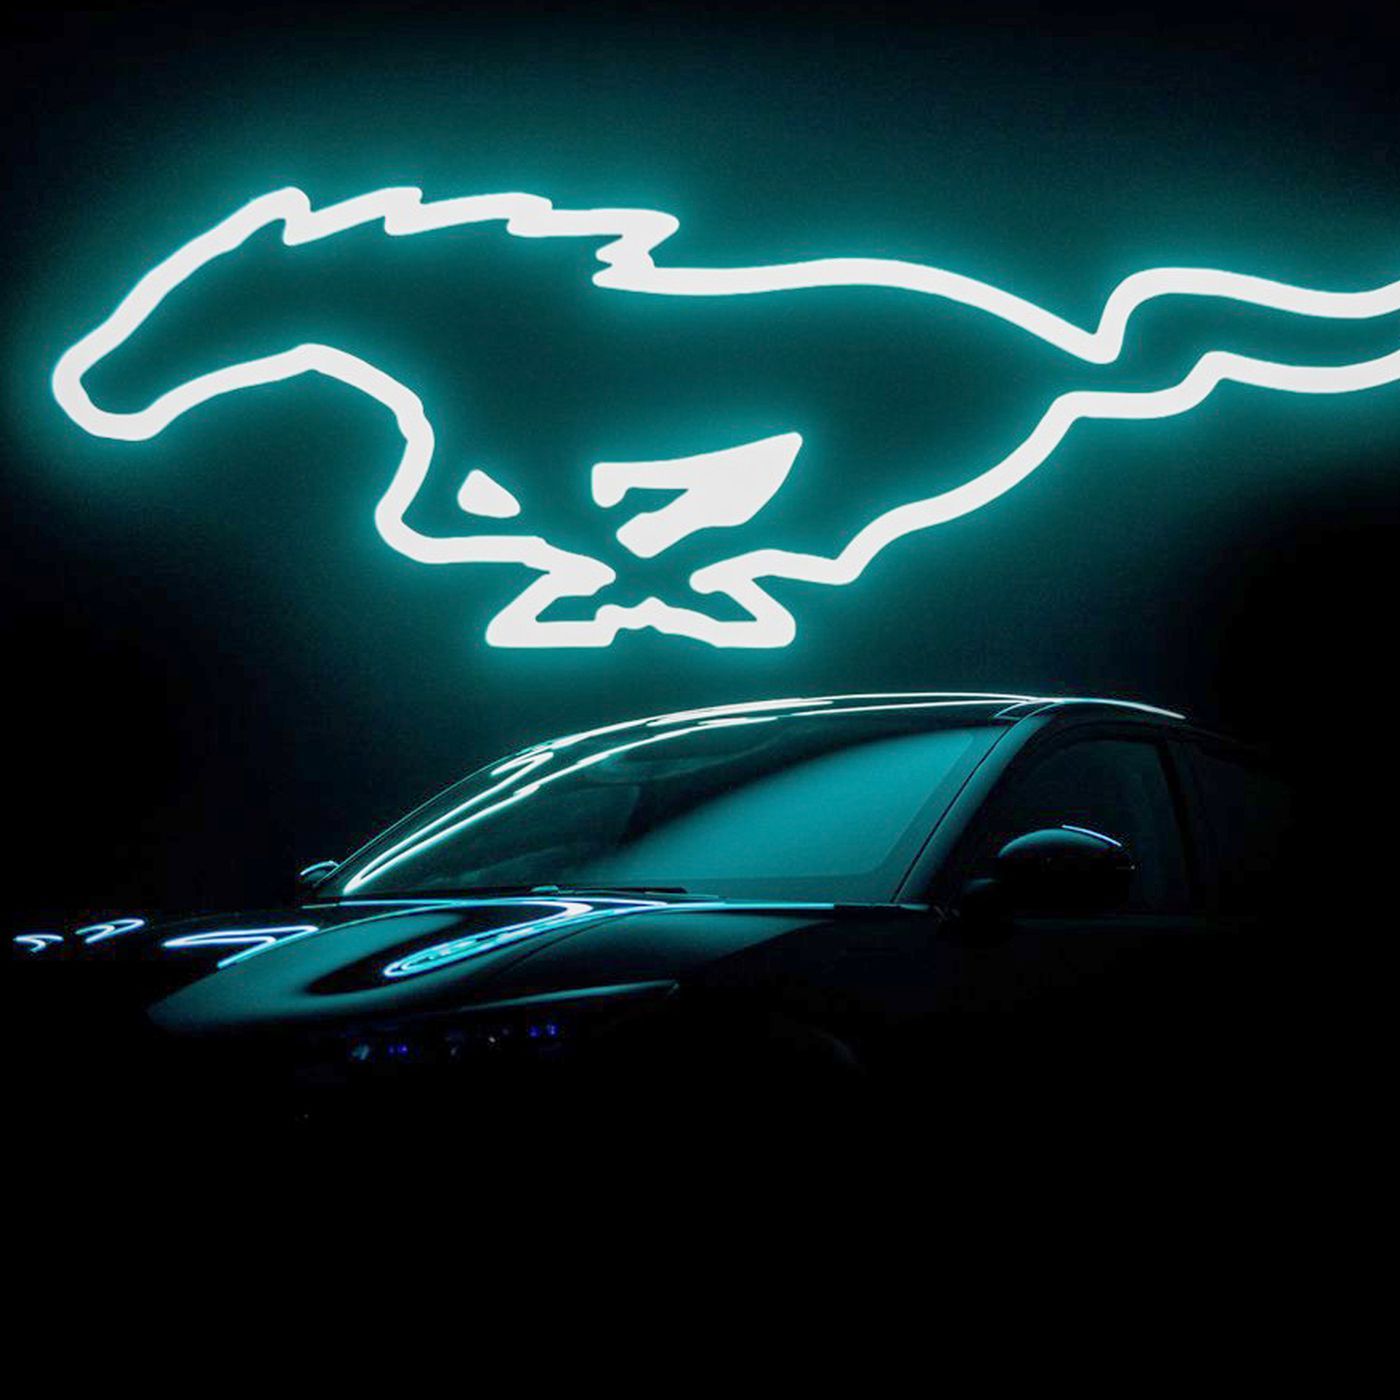 Ford Mustang Mach E: Watch The Live Stream At 9PM ET